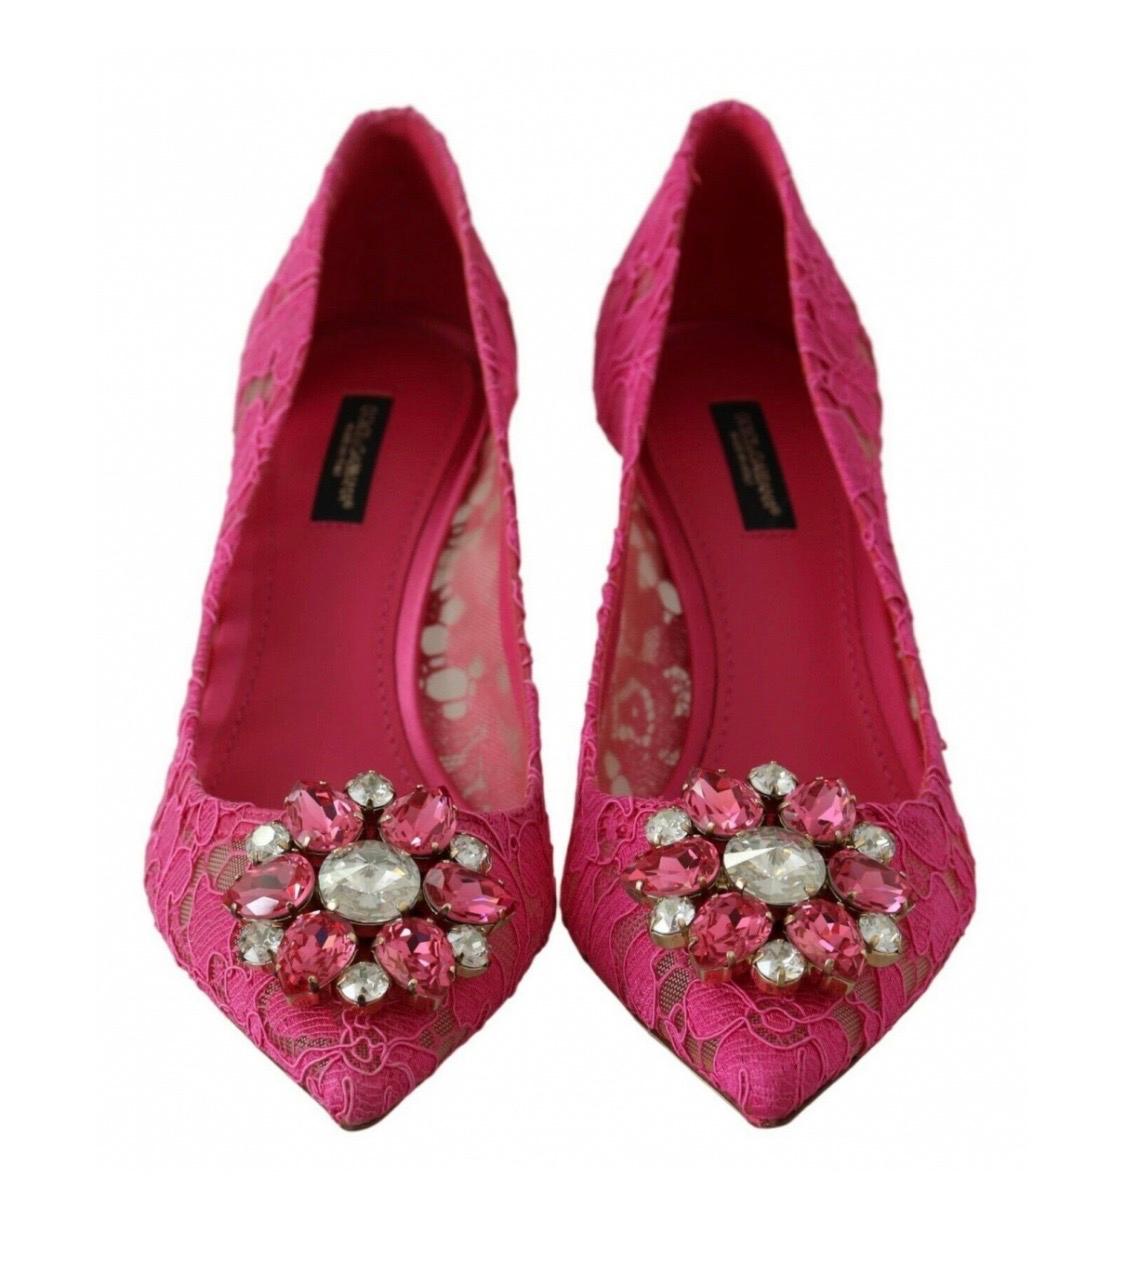 Dolce & Gabbana pink PUMP lace shoes with jewel detail on
the top heels  For Sale 1